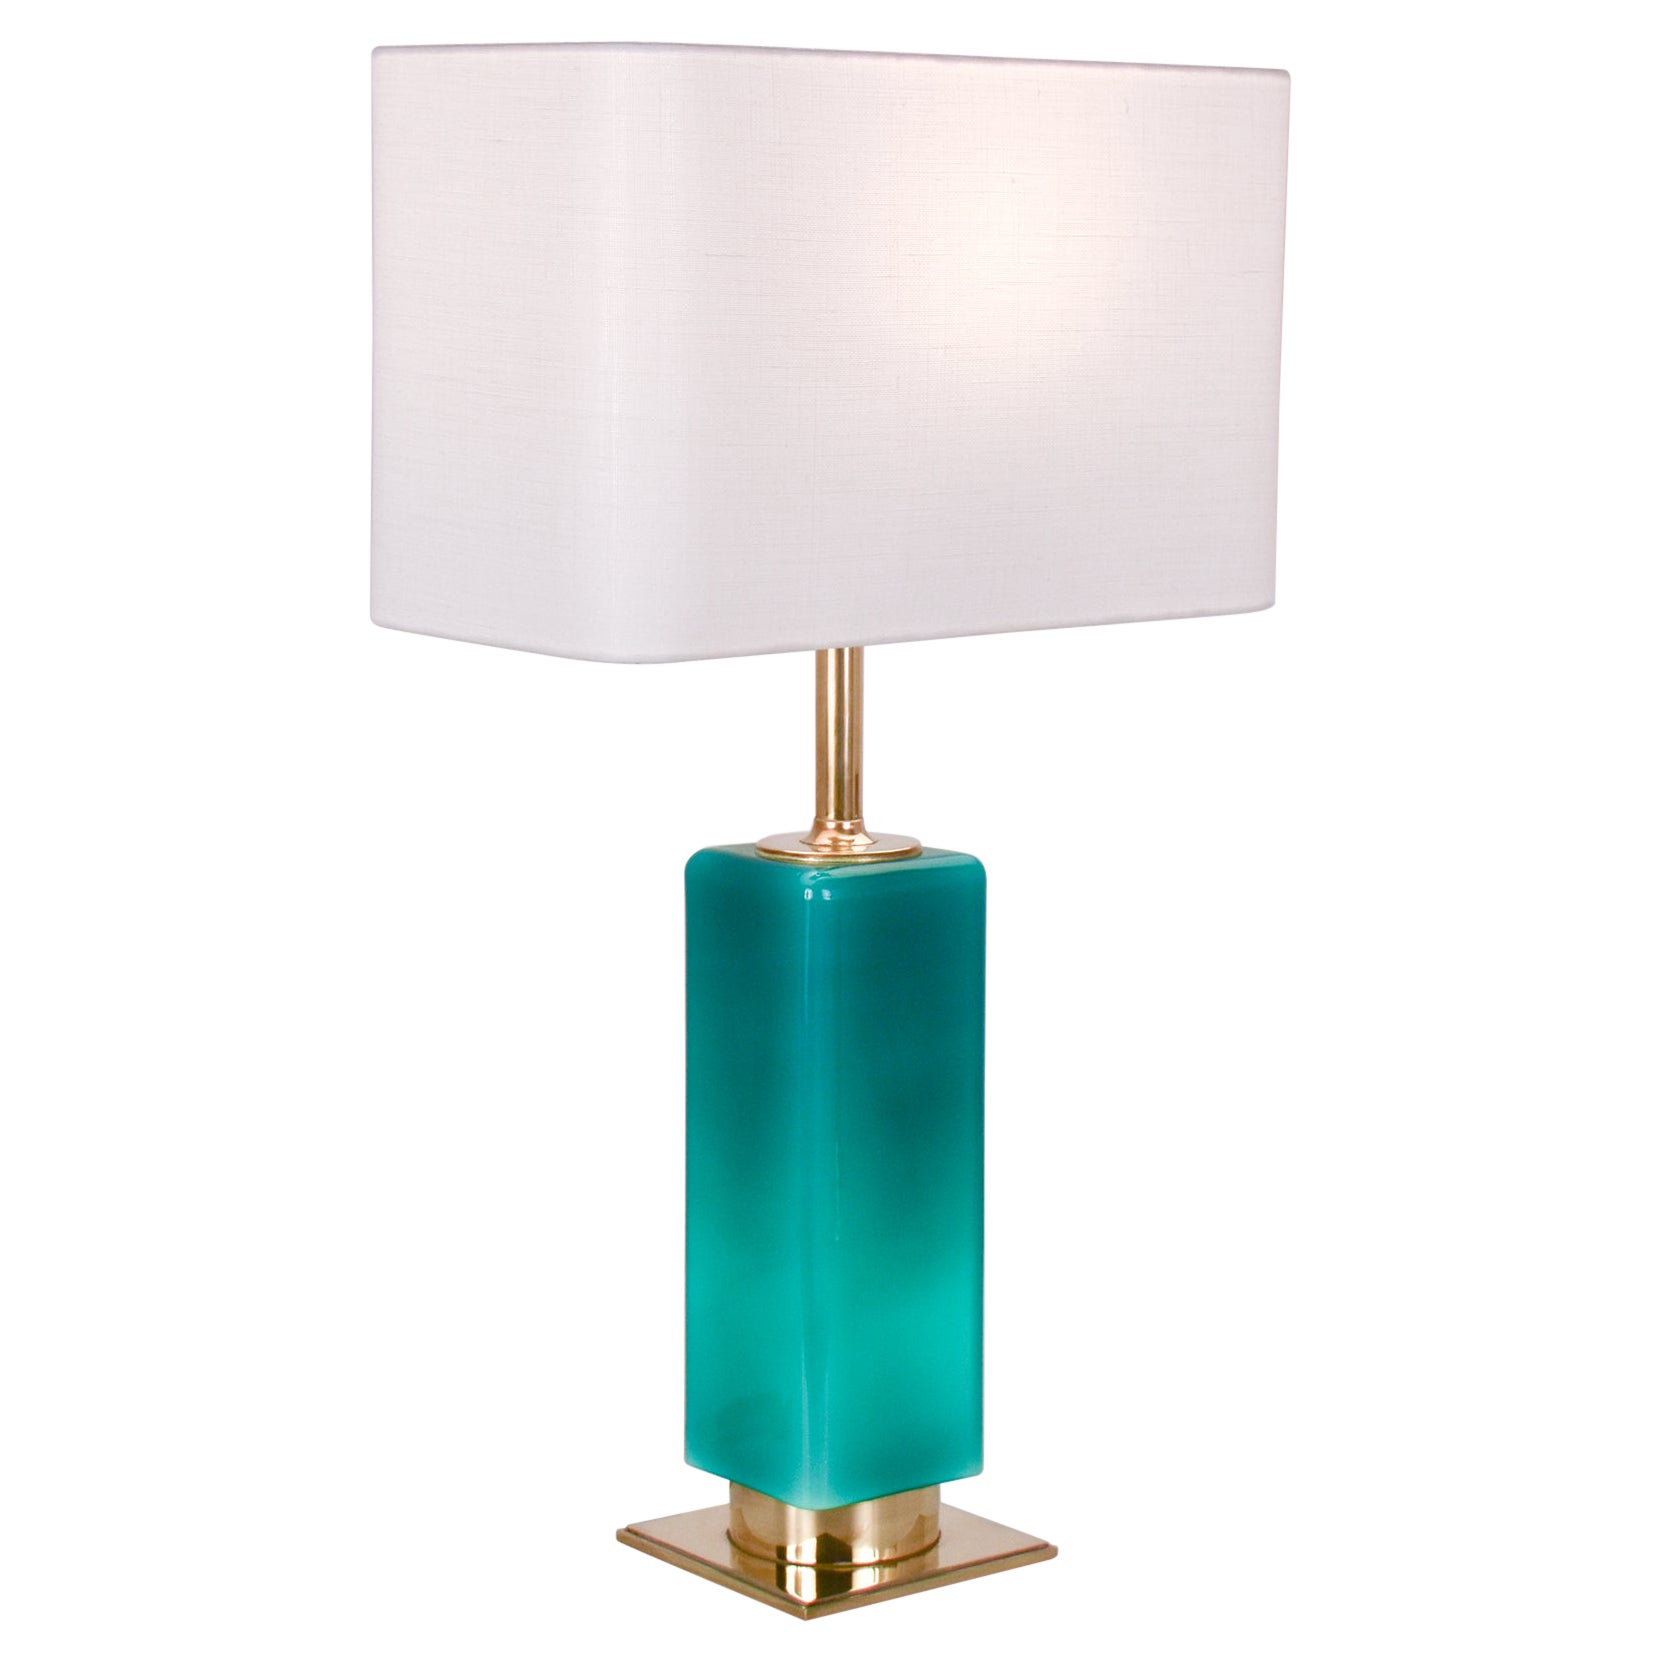 Mid- Century Large Green Glass and Brass Table Lamp Metalarte, Spain, 1970's